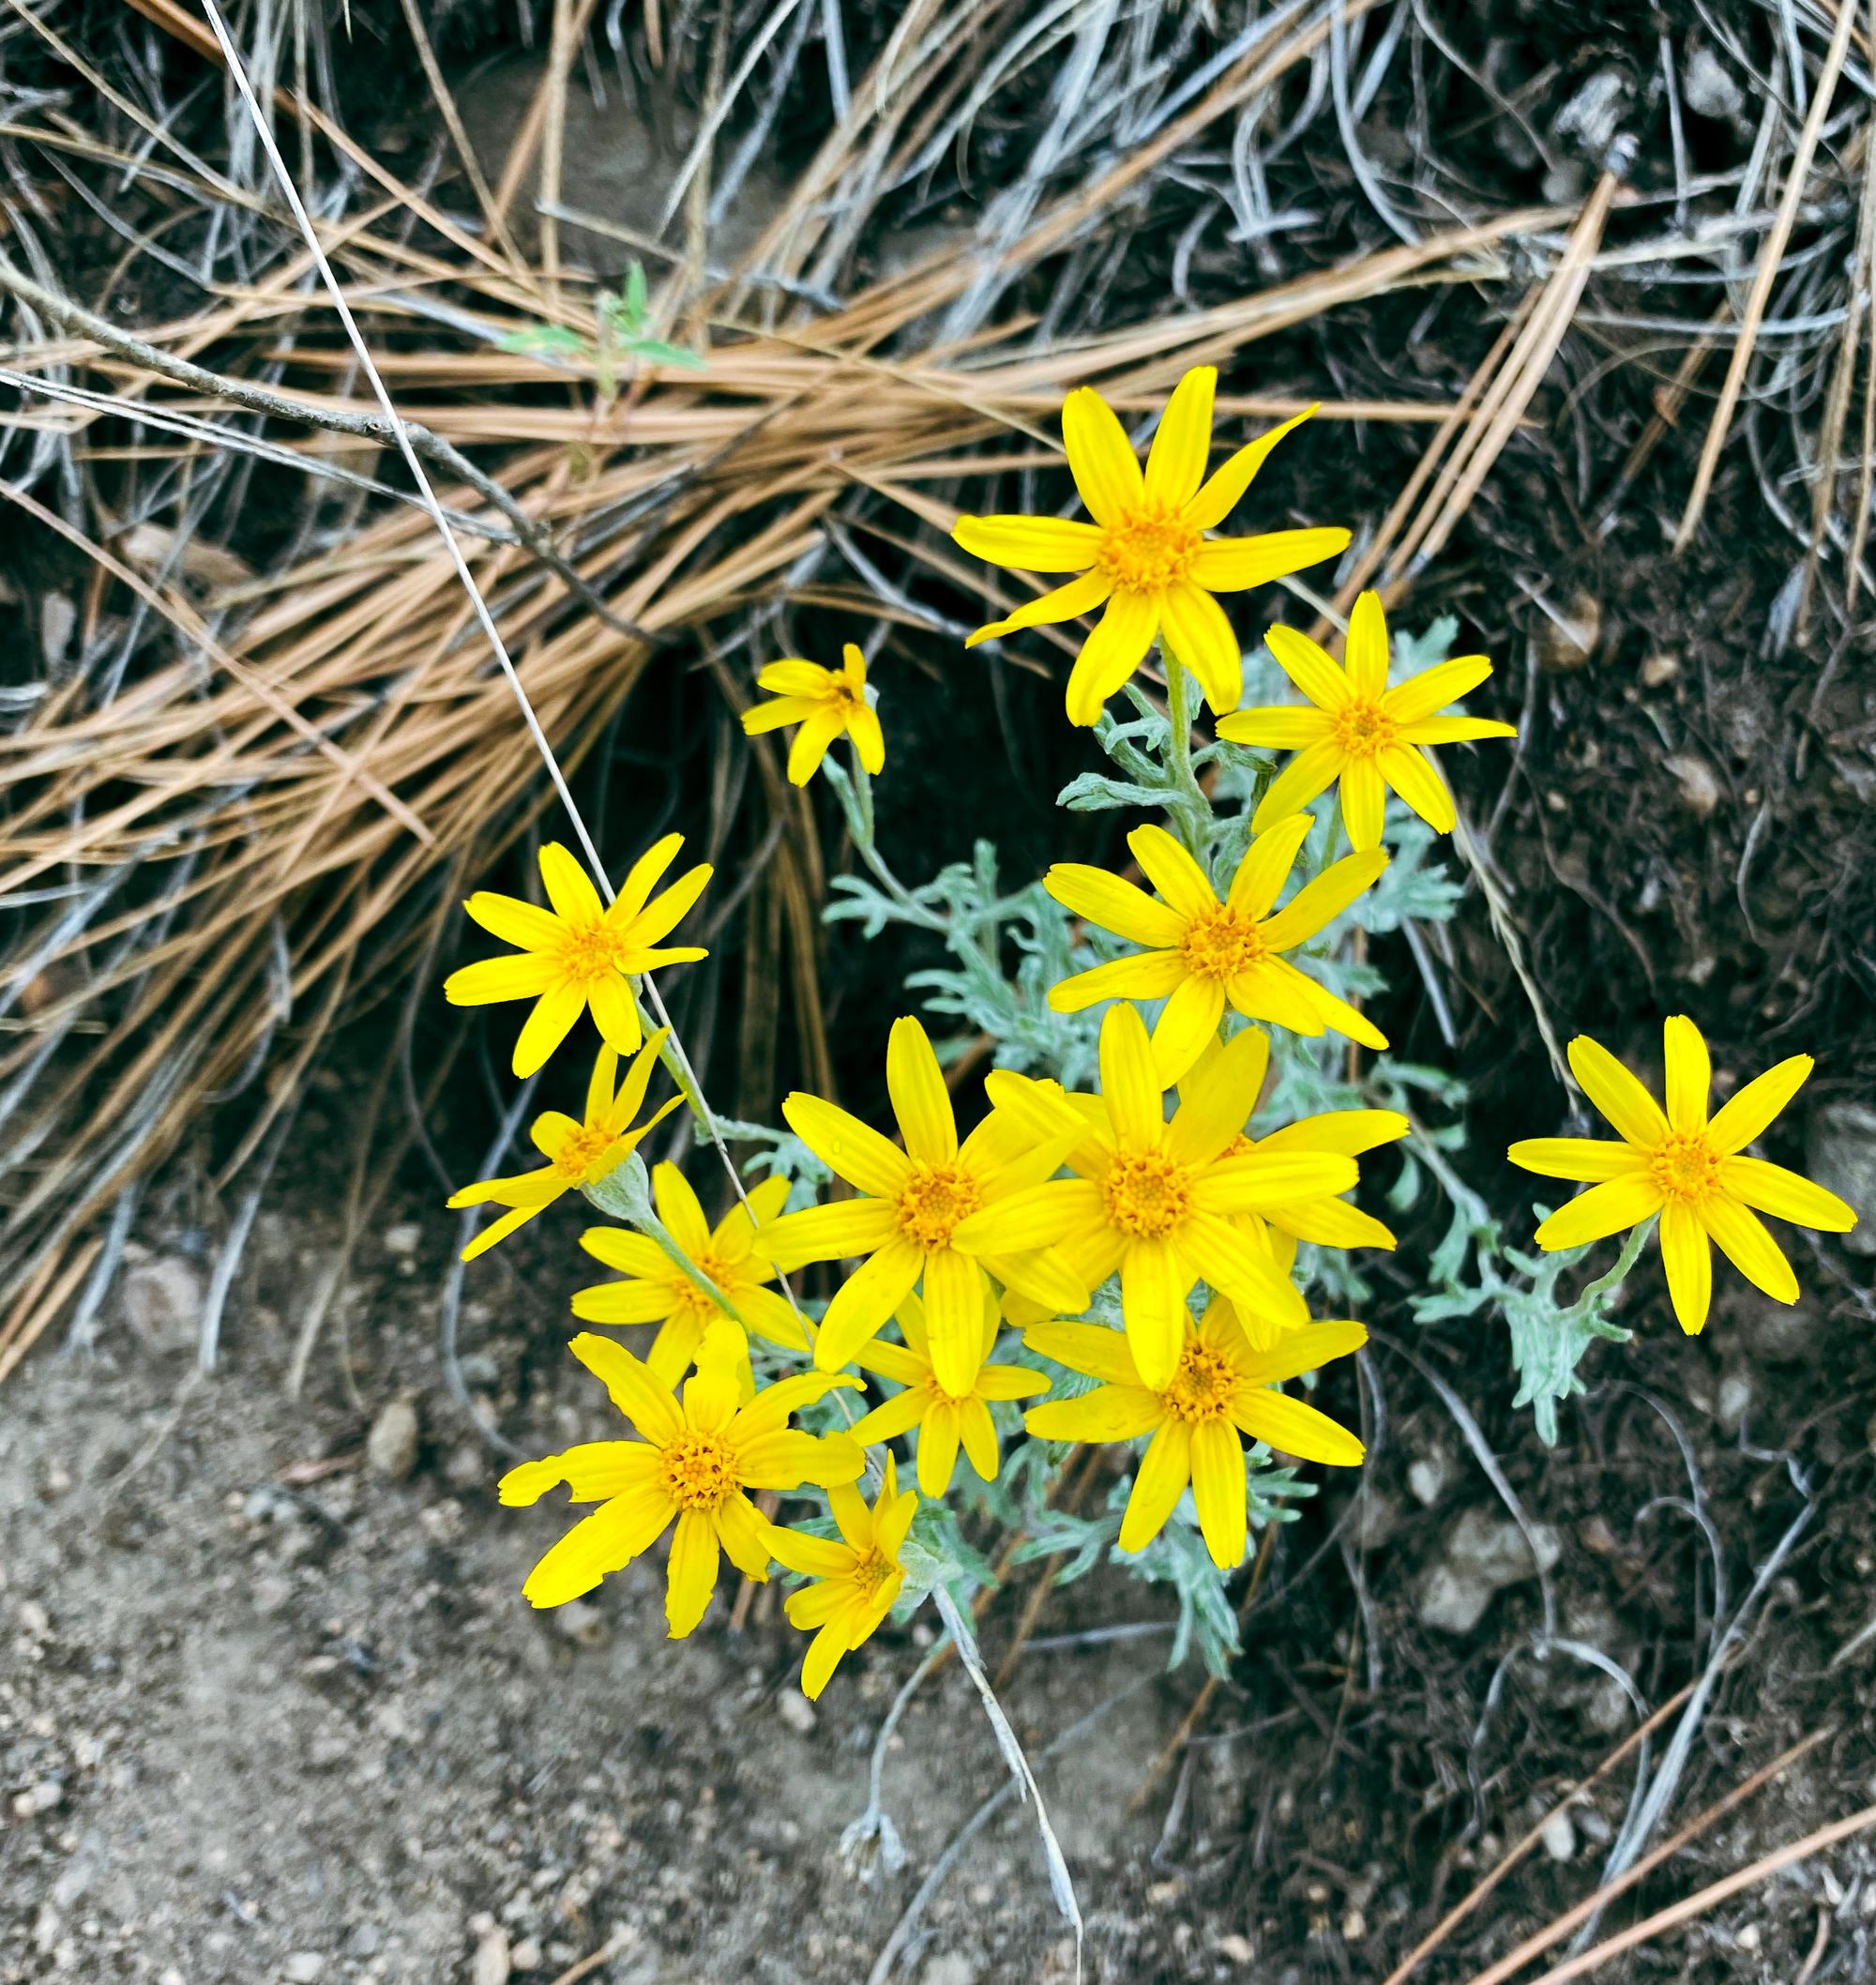 grey foliage and many bright yellow composite flowers